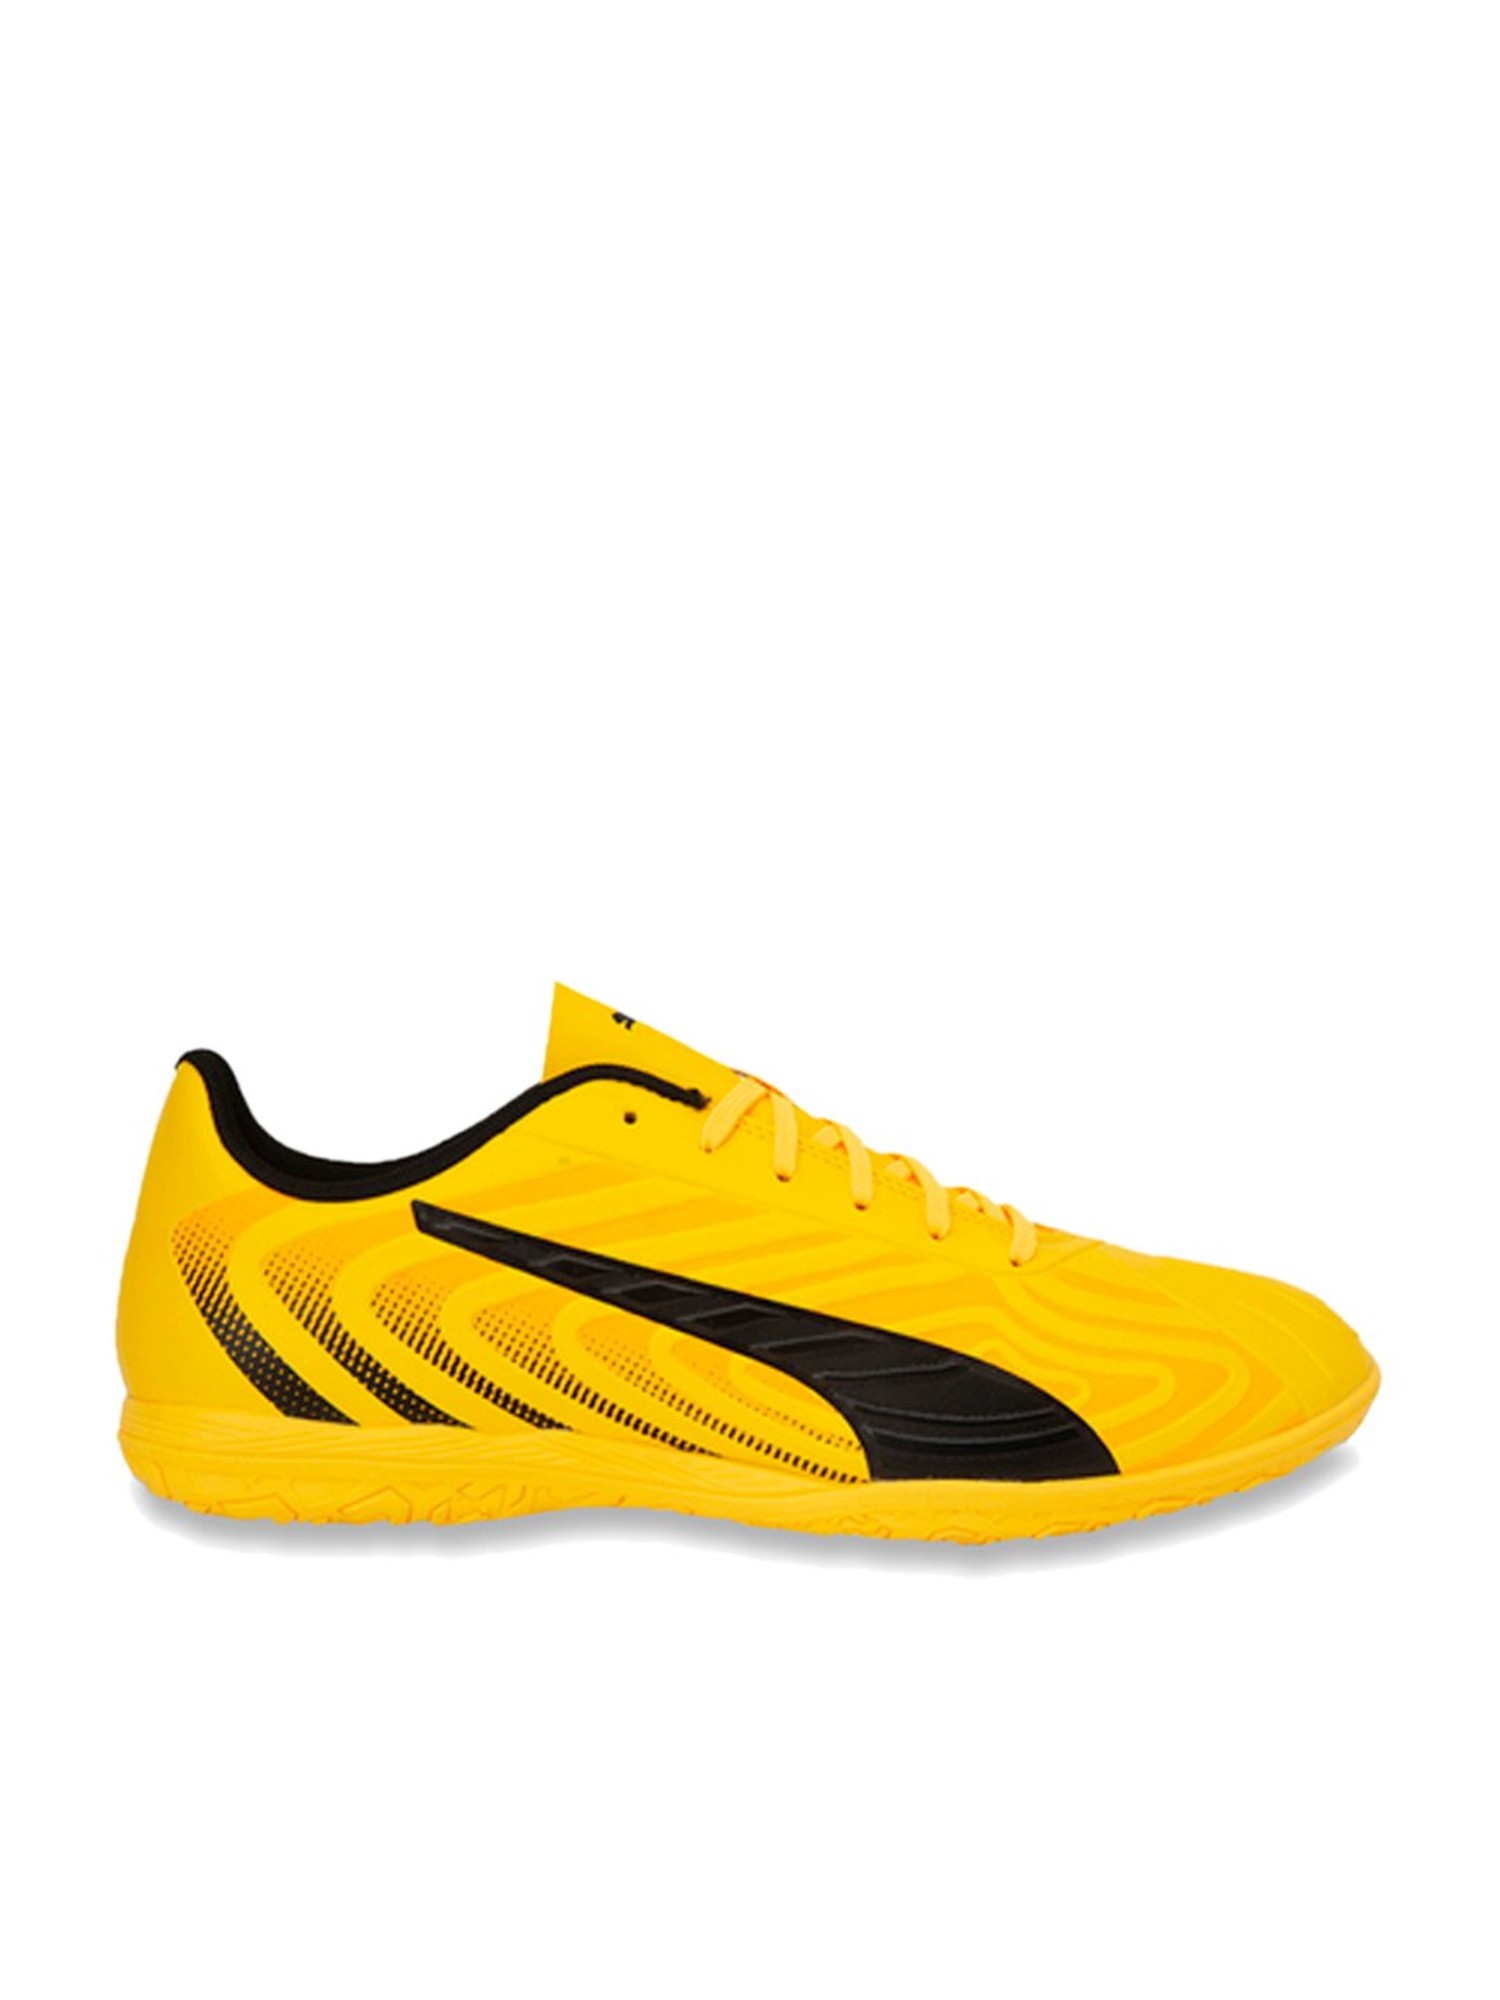 Buy Puma One 20.4 IT Yellow Football Shoes for Men at Best Price @ Tata CLiQ